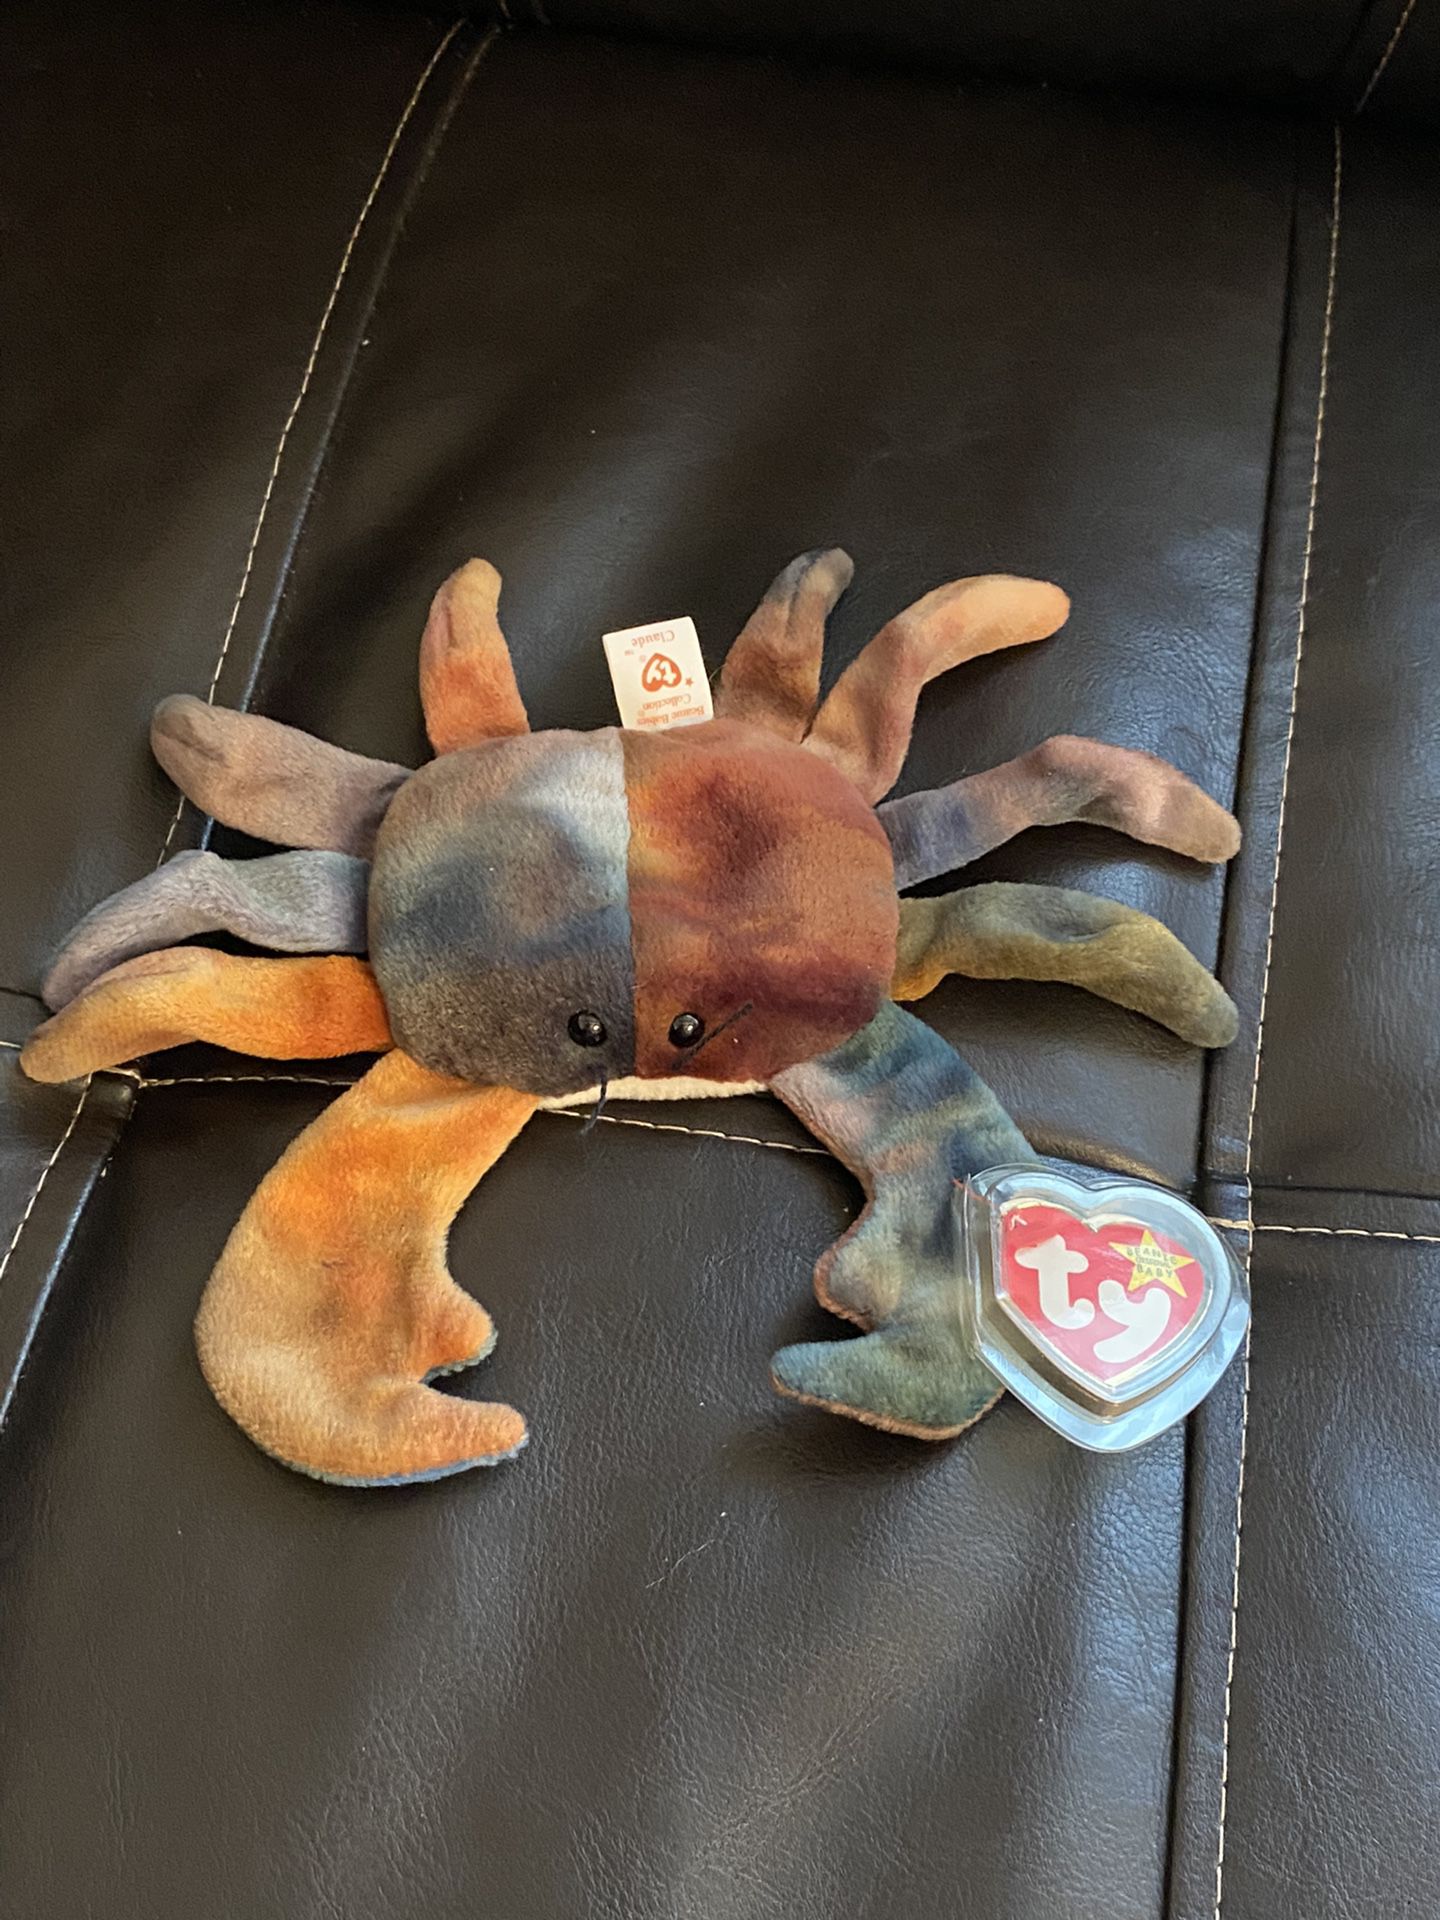 Beanie Baby collection